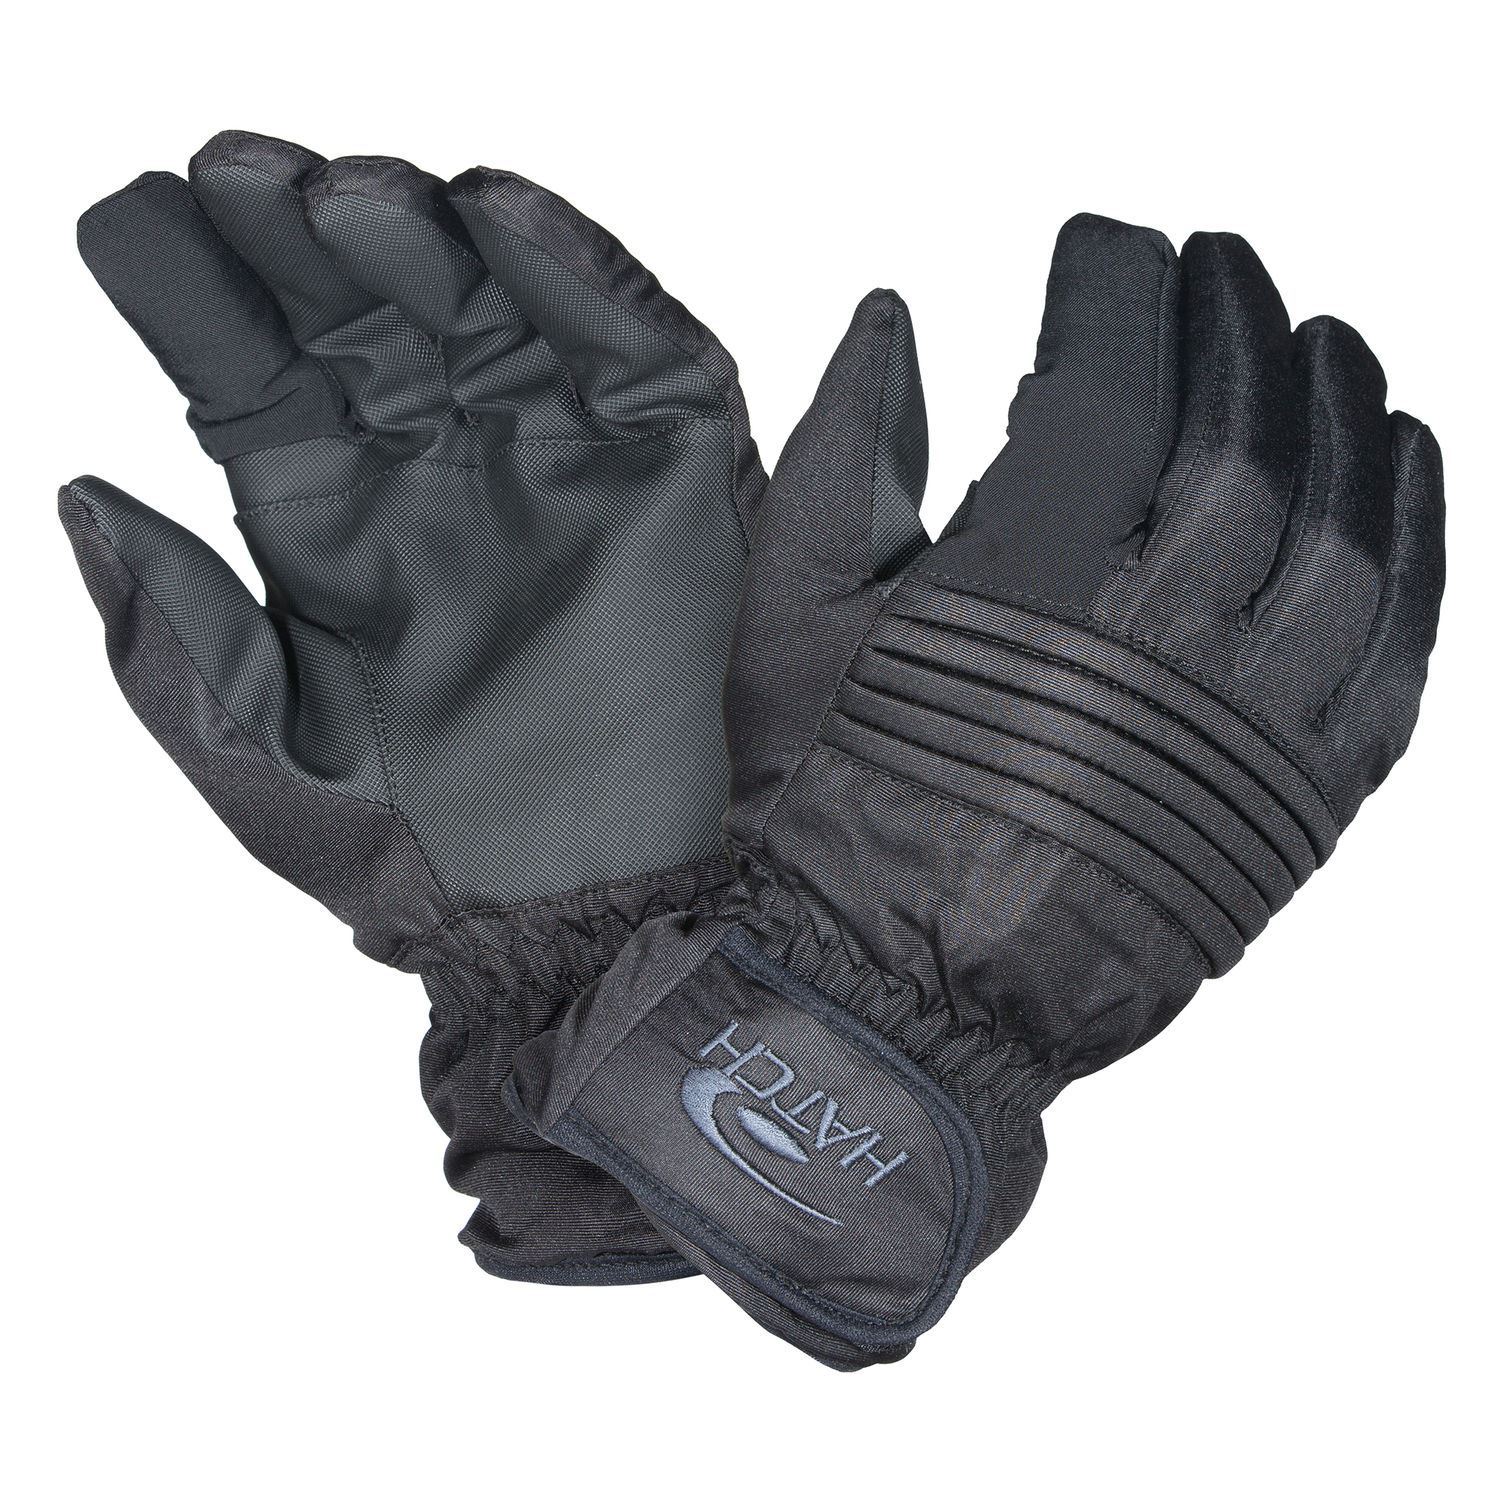 Hatch APG30 Waterproof Cold Weather Duty Glove Canada's Source